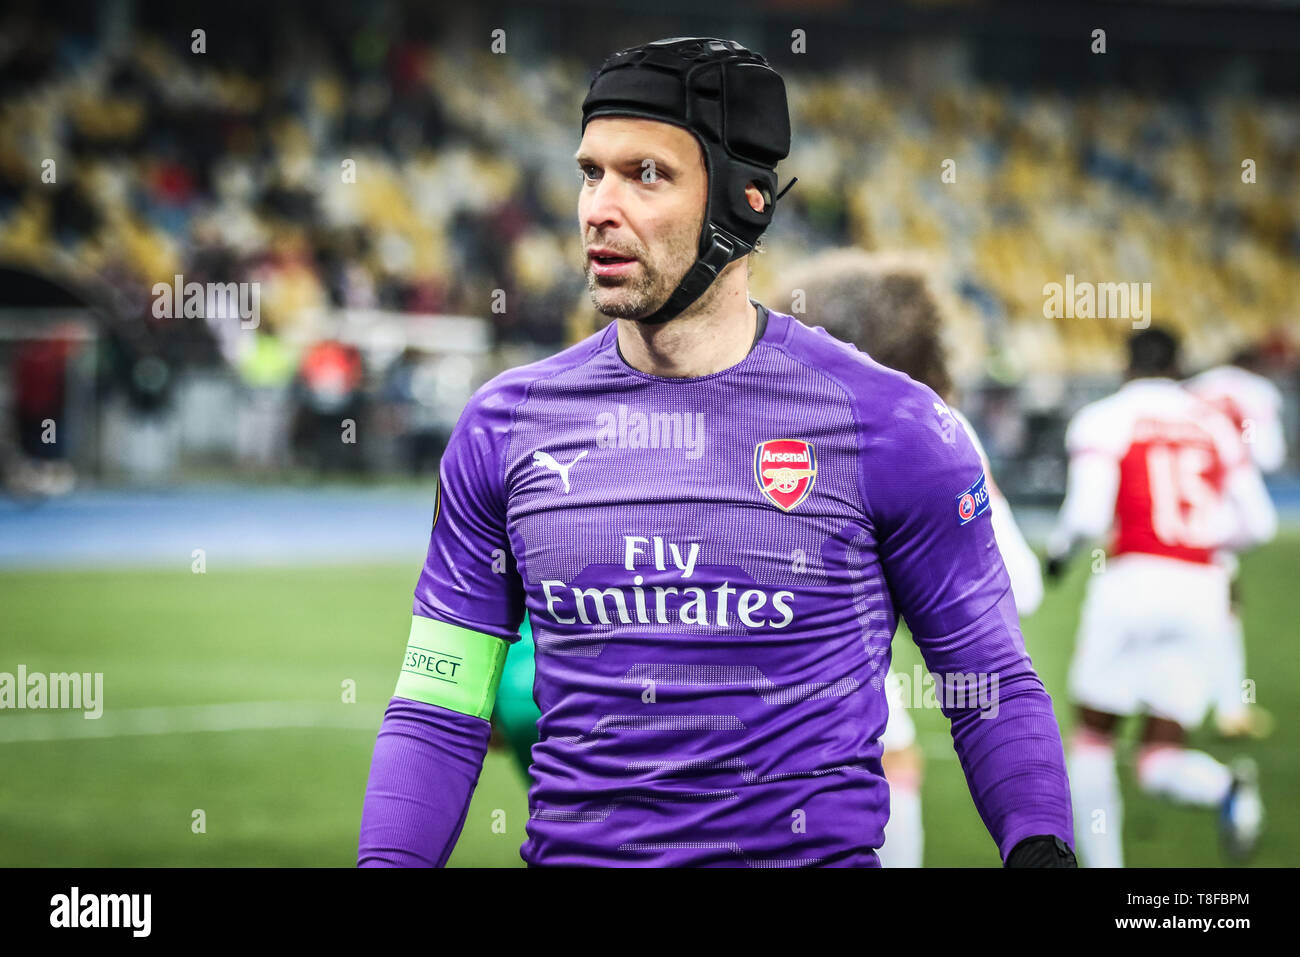 KYIV, UKRAINE - NOVEMBER 29, 2018: Goalkeeper Petr Cech of Arsenal in action during the UEFA Europa League game against Vorskla Poltava at NSC Olimpiy Stock Photo